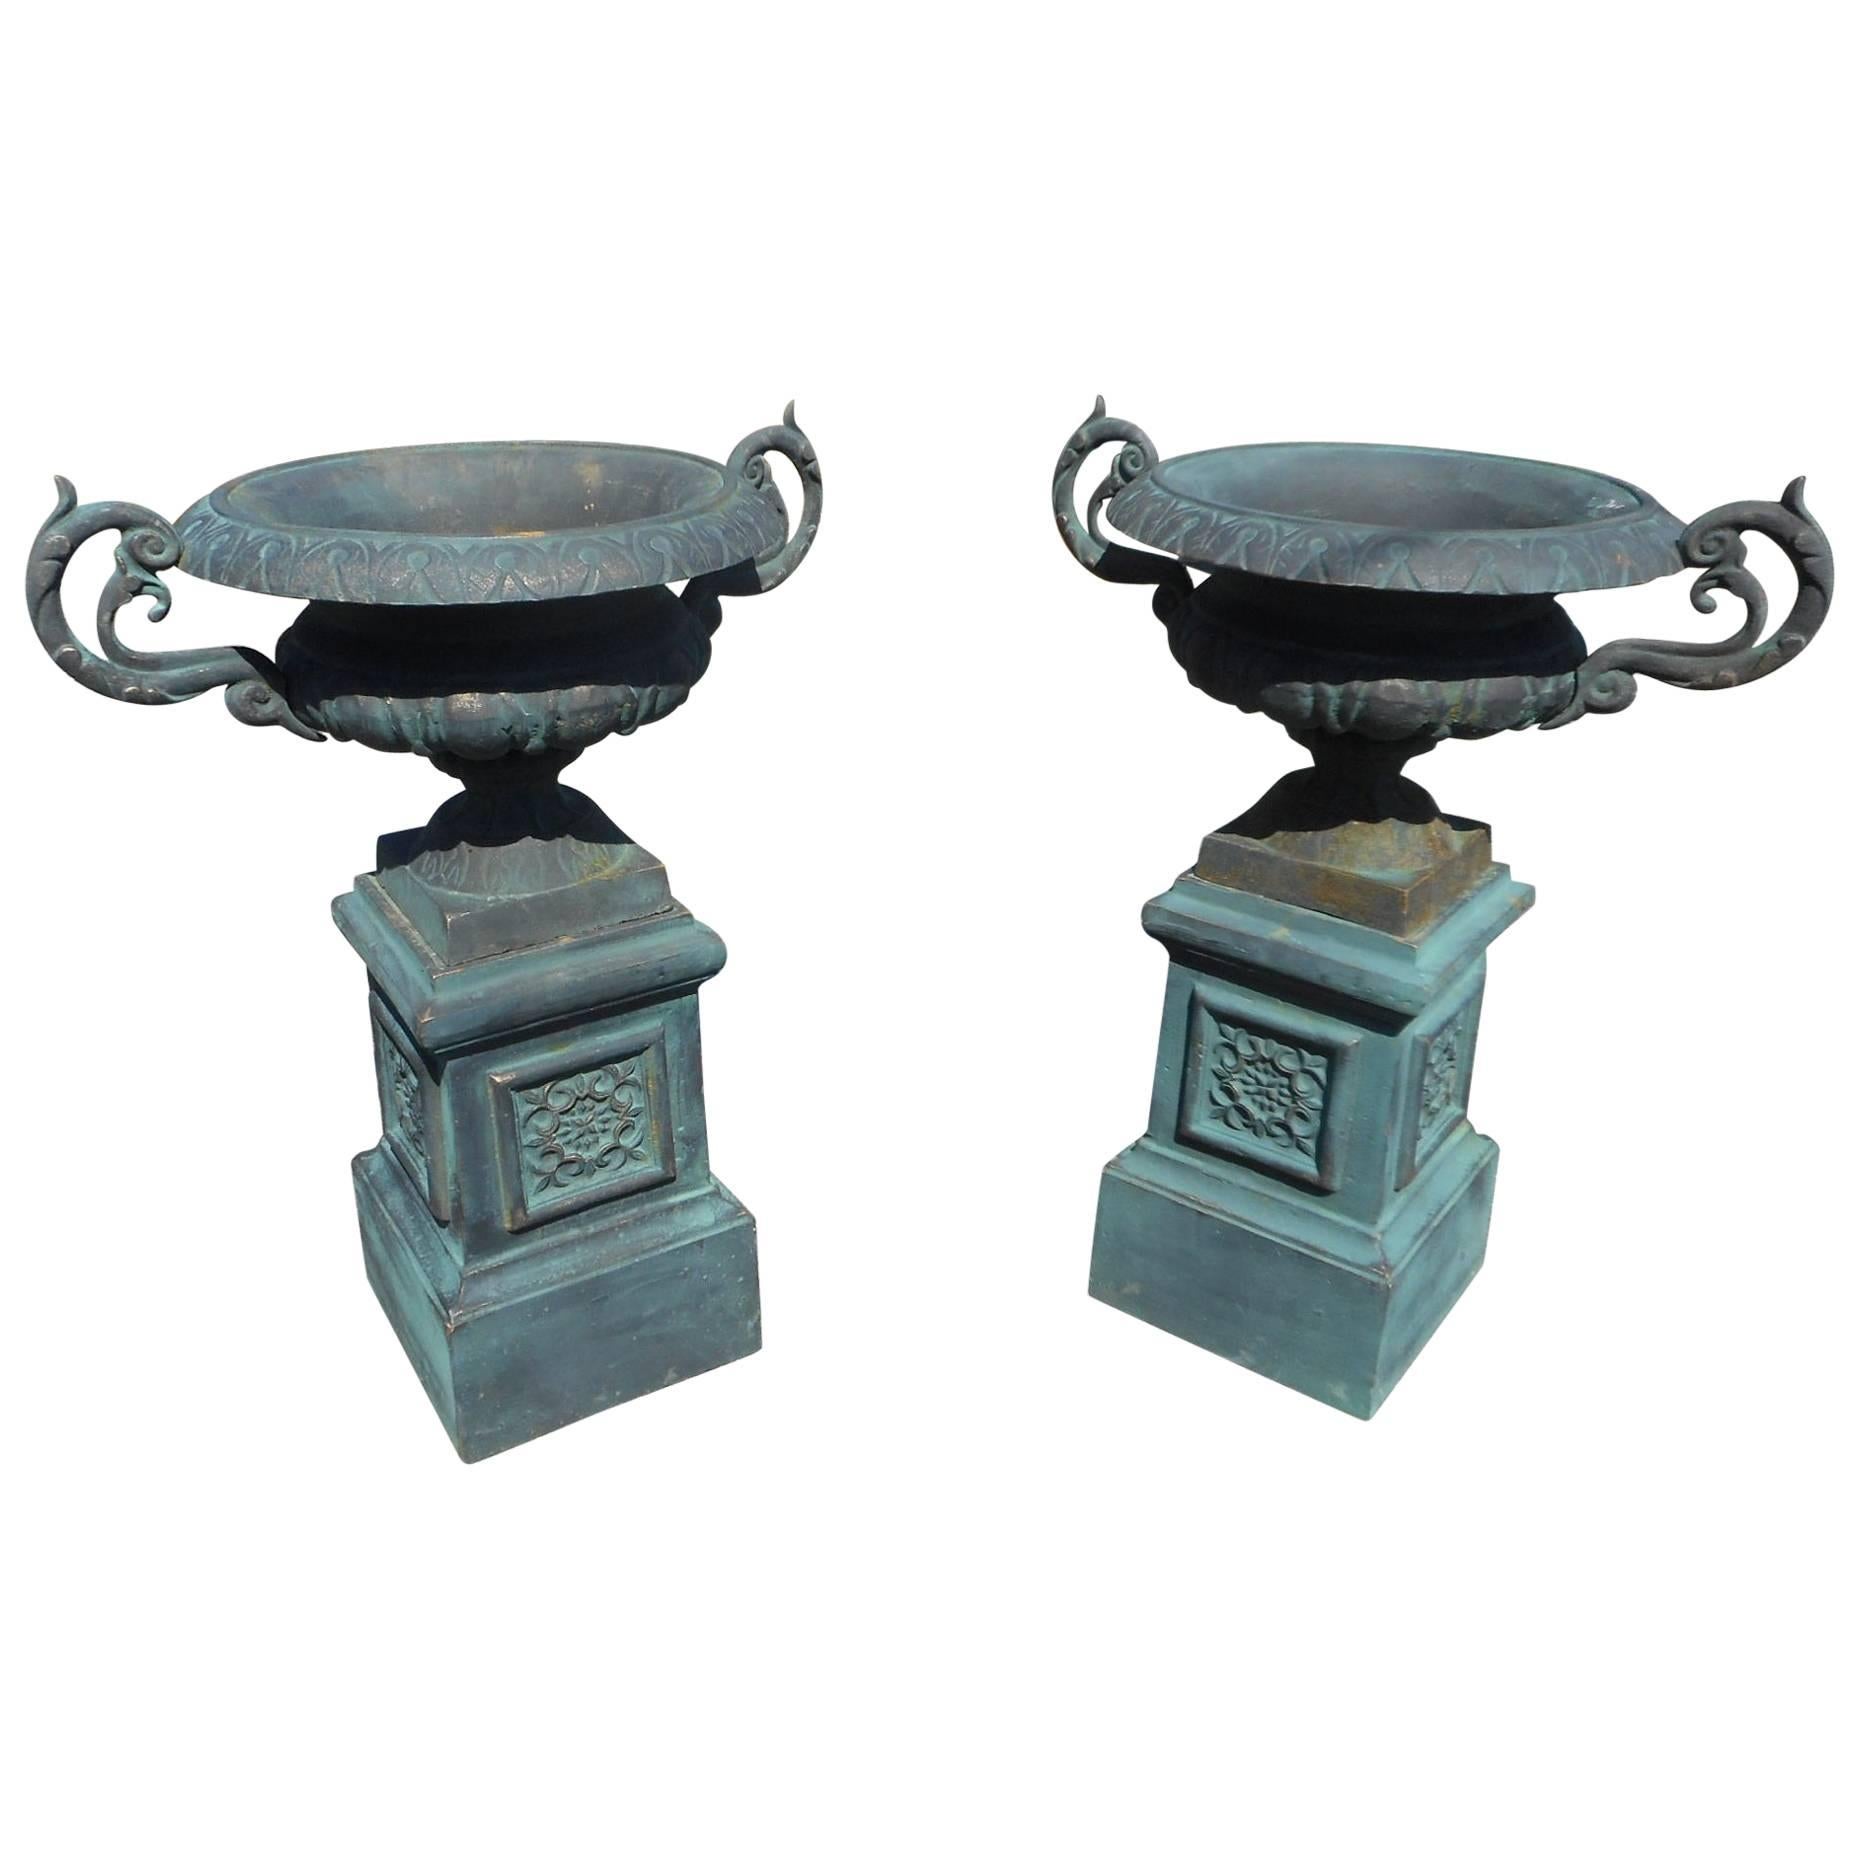 Pair of Cast Iron Urns on Pedestal Bases